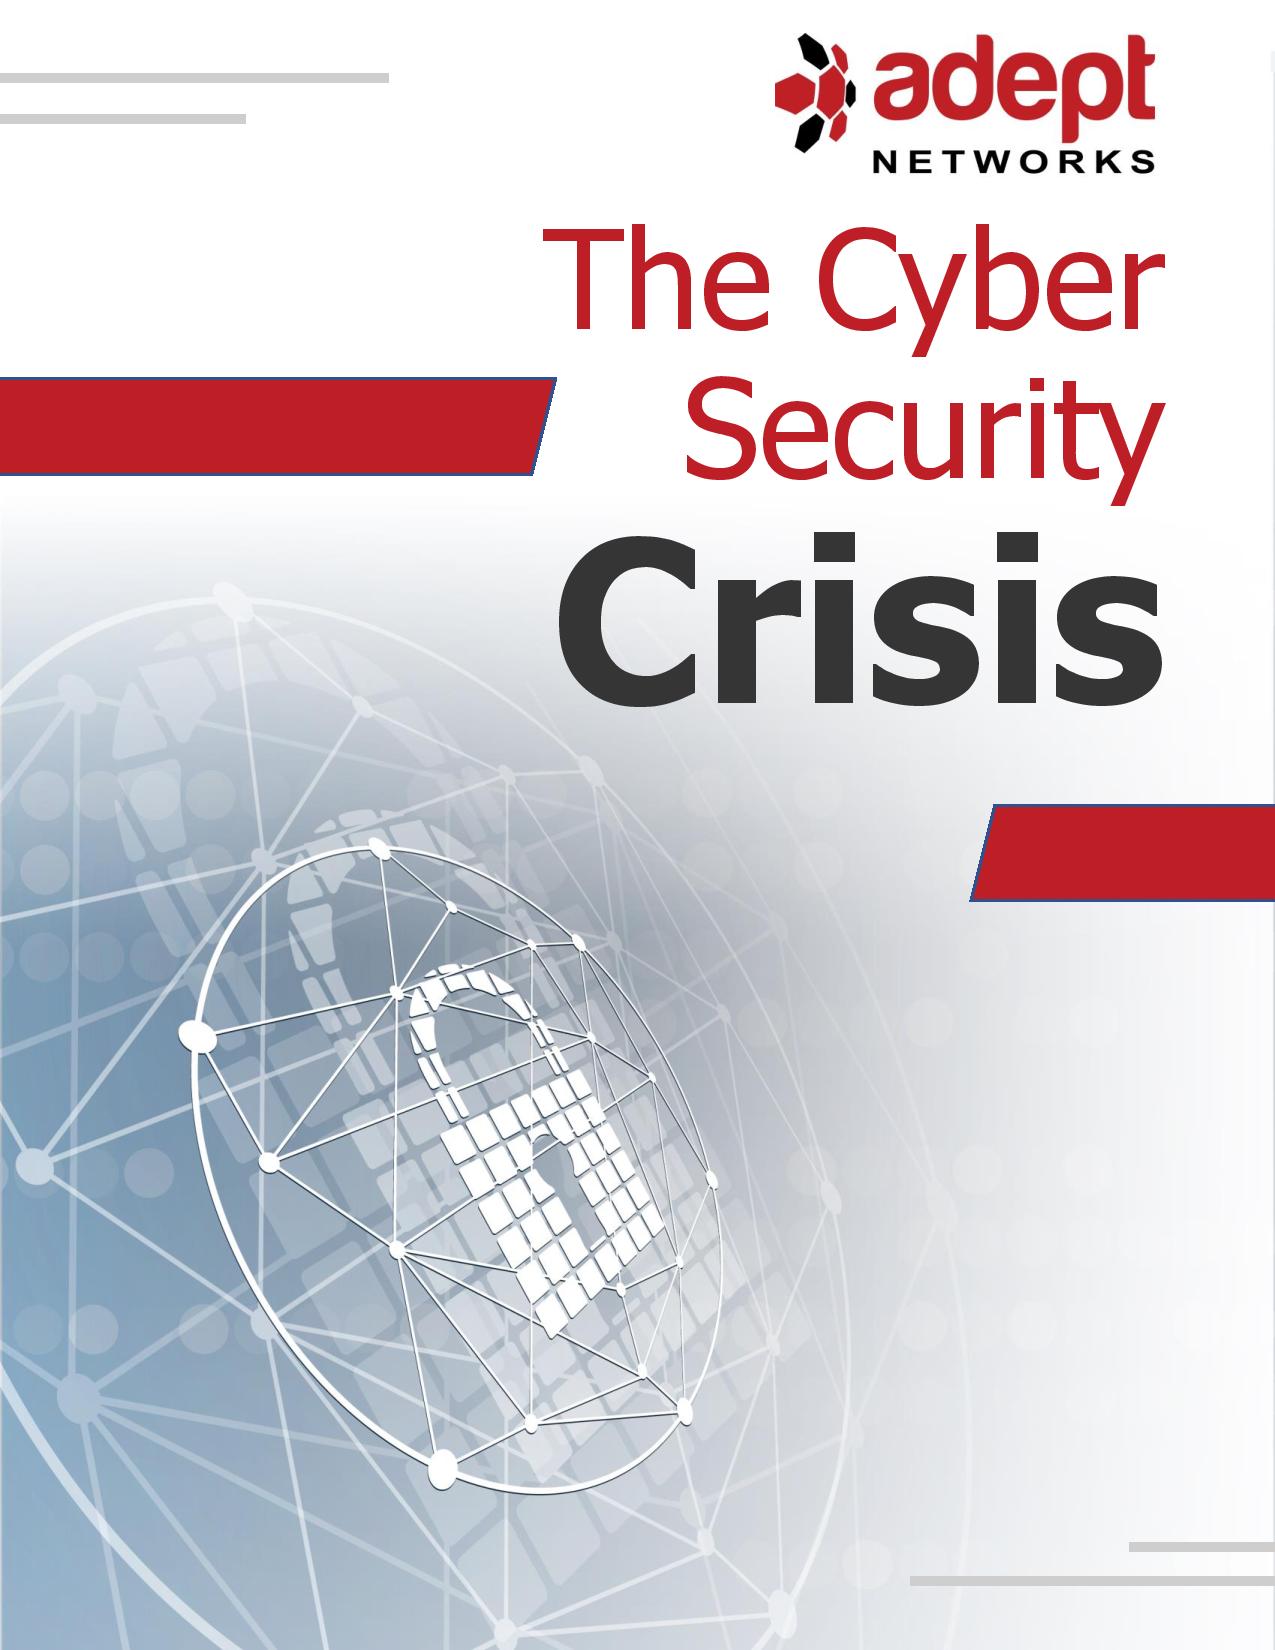 Cyber Security Crisis - Adept Networks